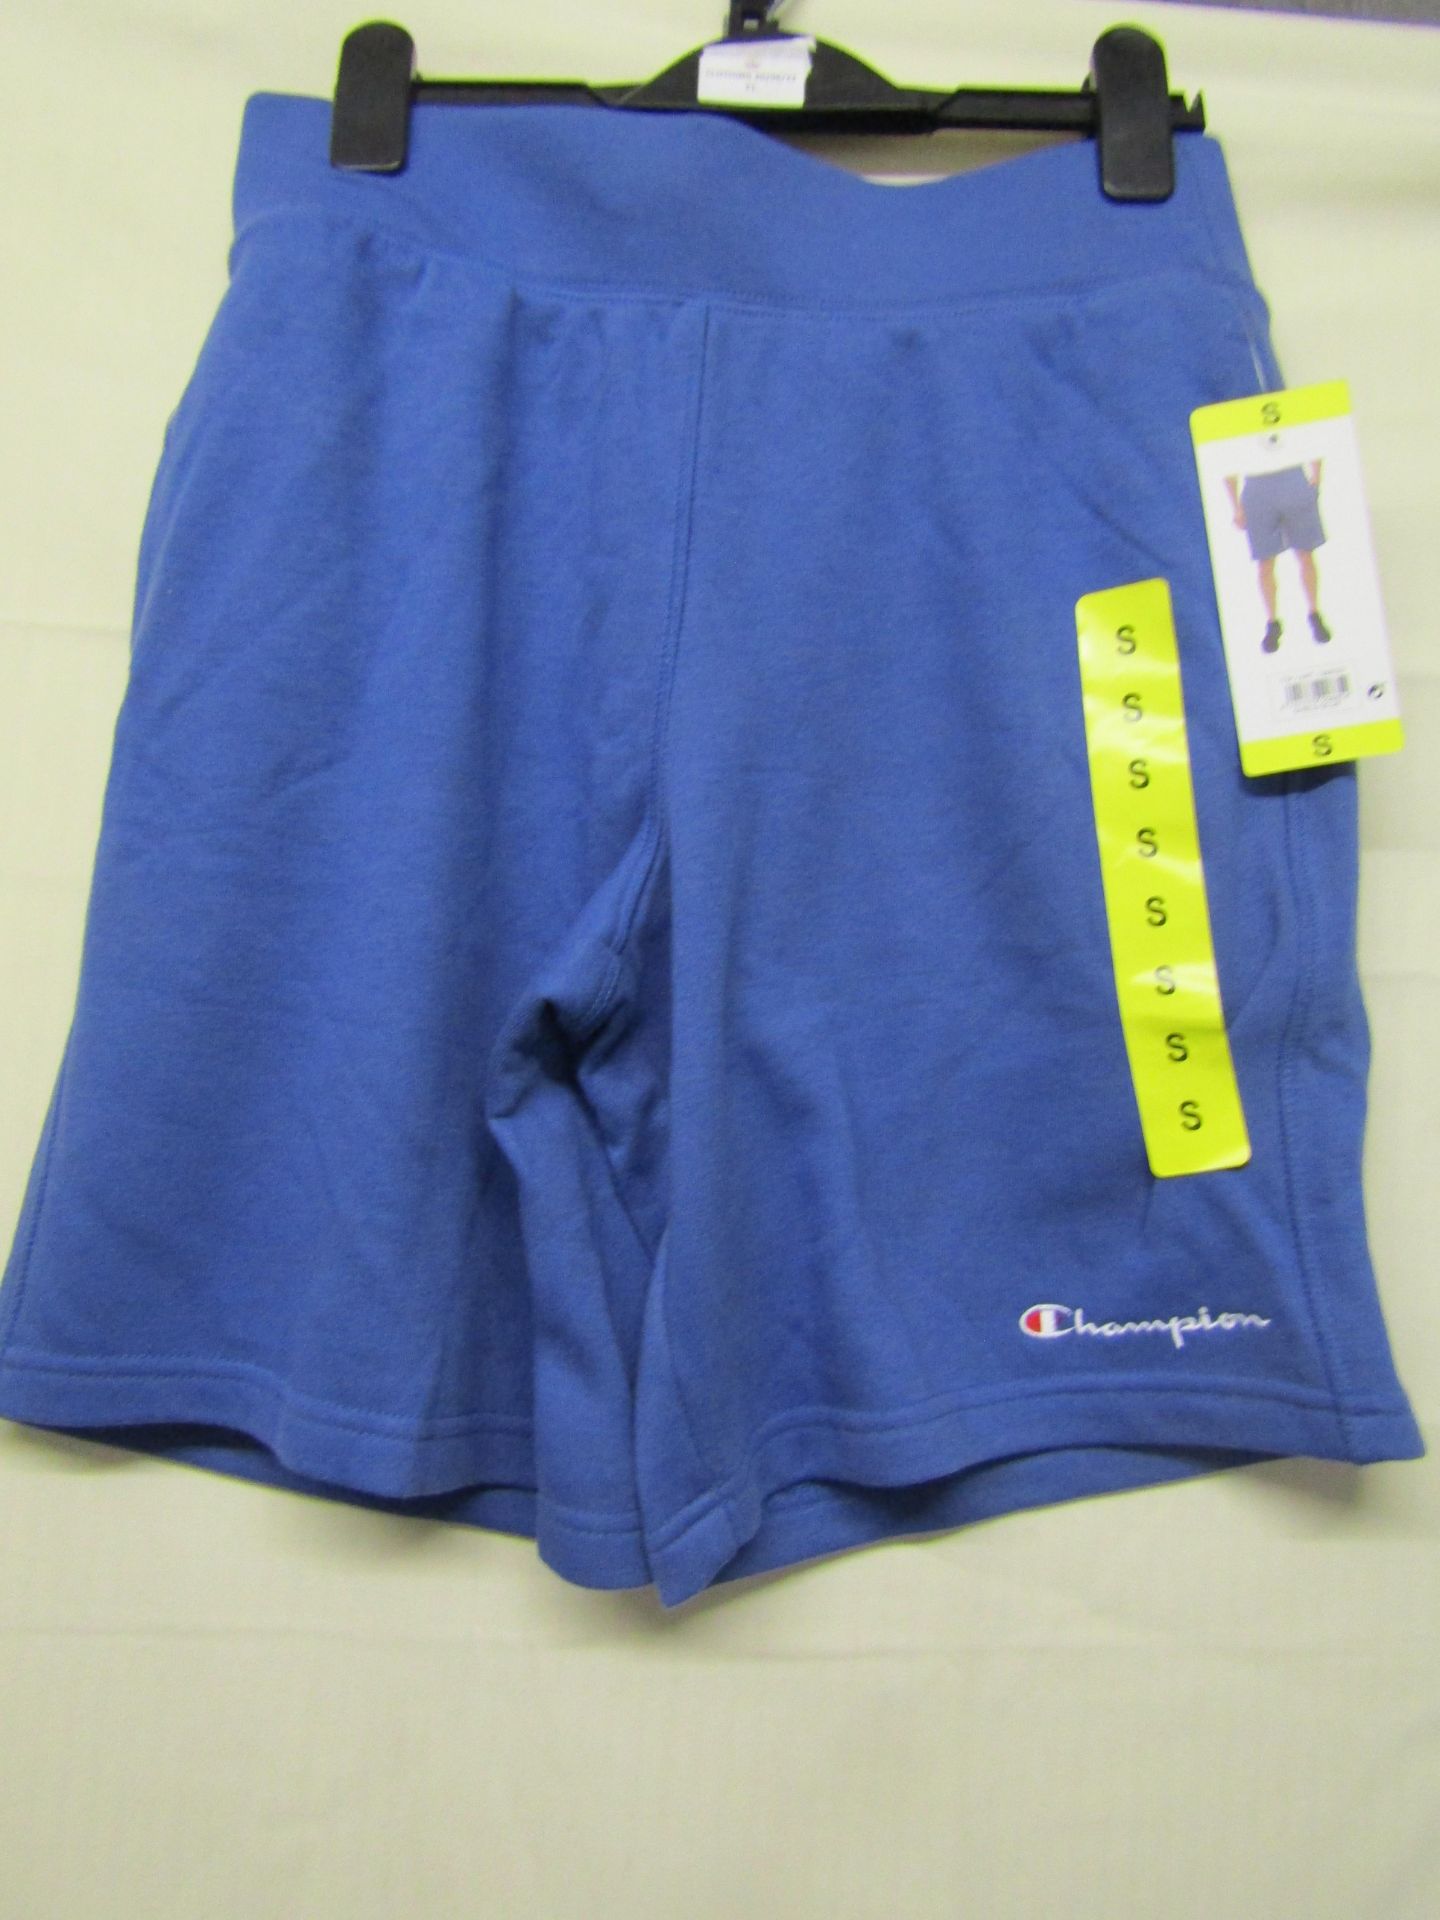 1 X Pair of Champion Shorts Blue Size S New With Tags RRP £34.99